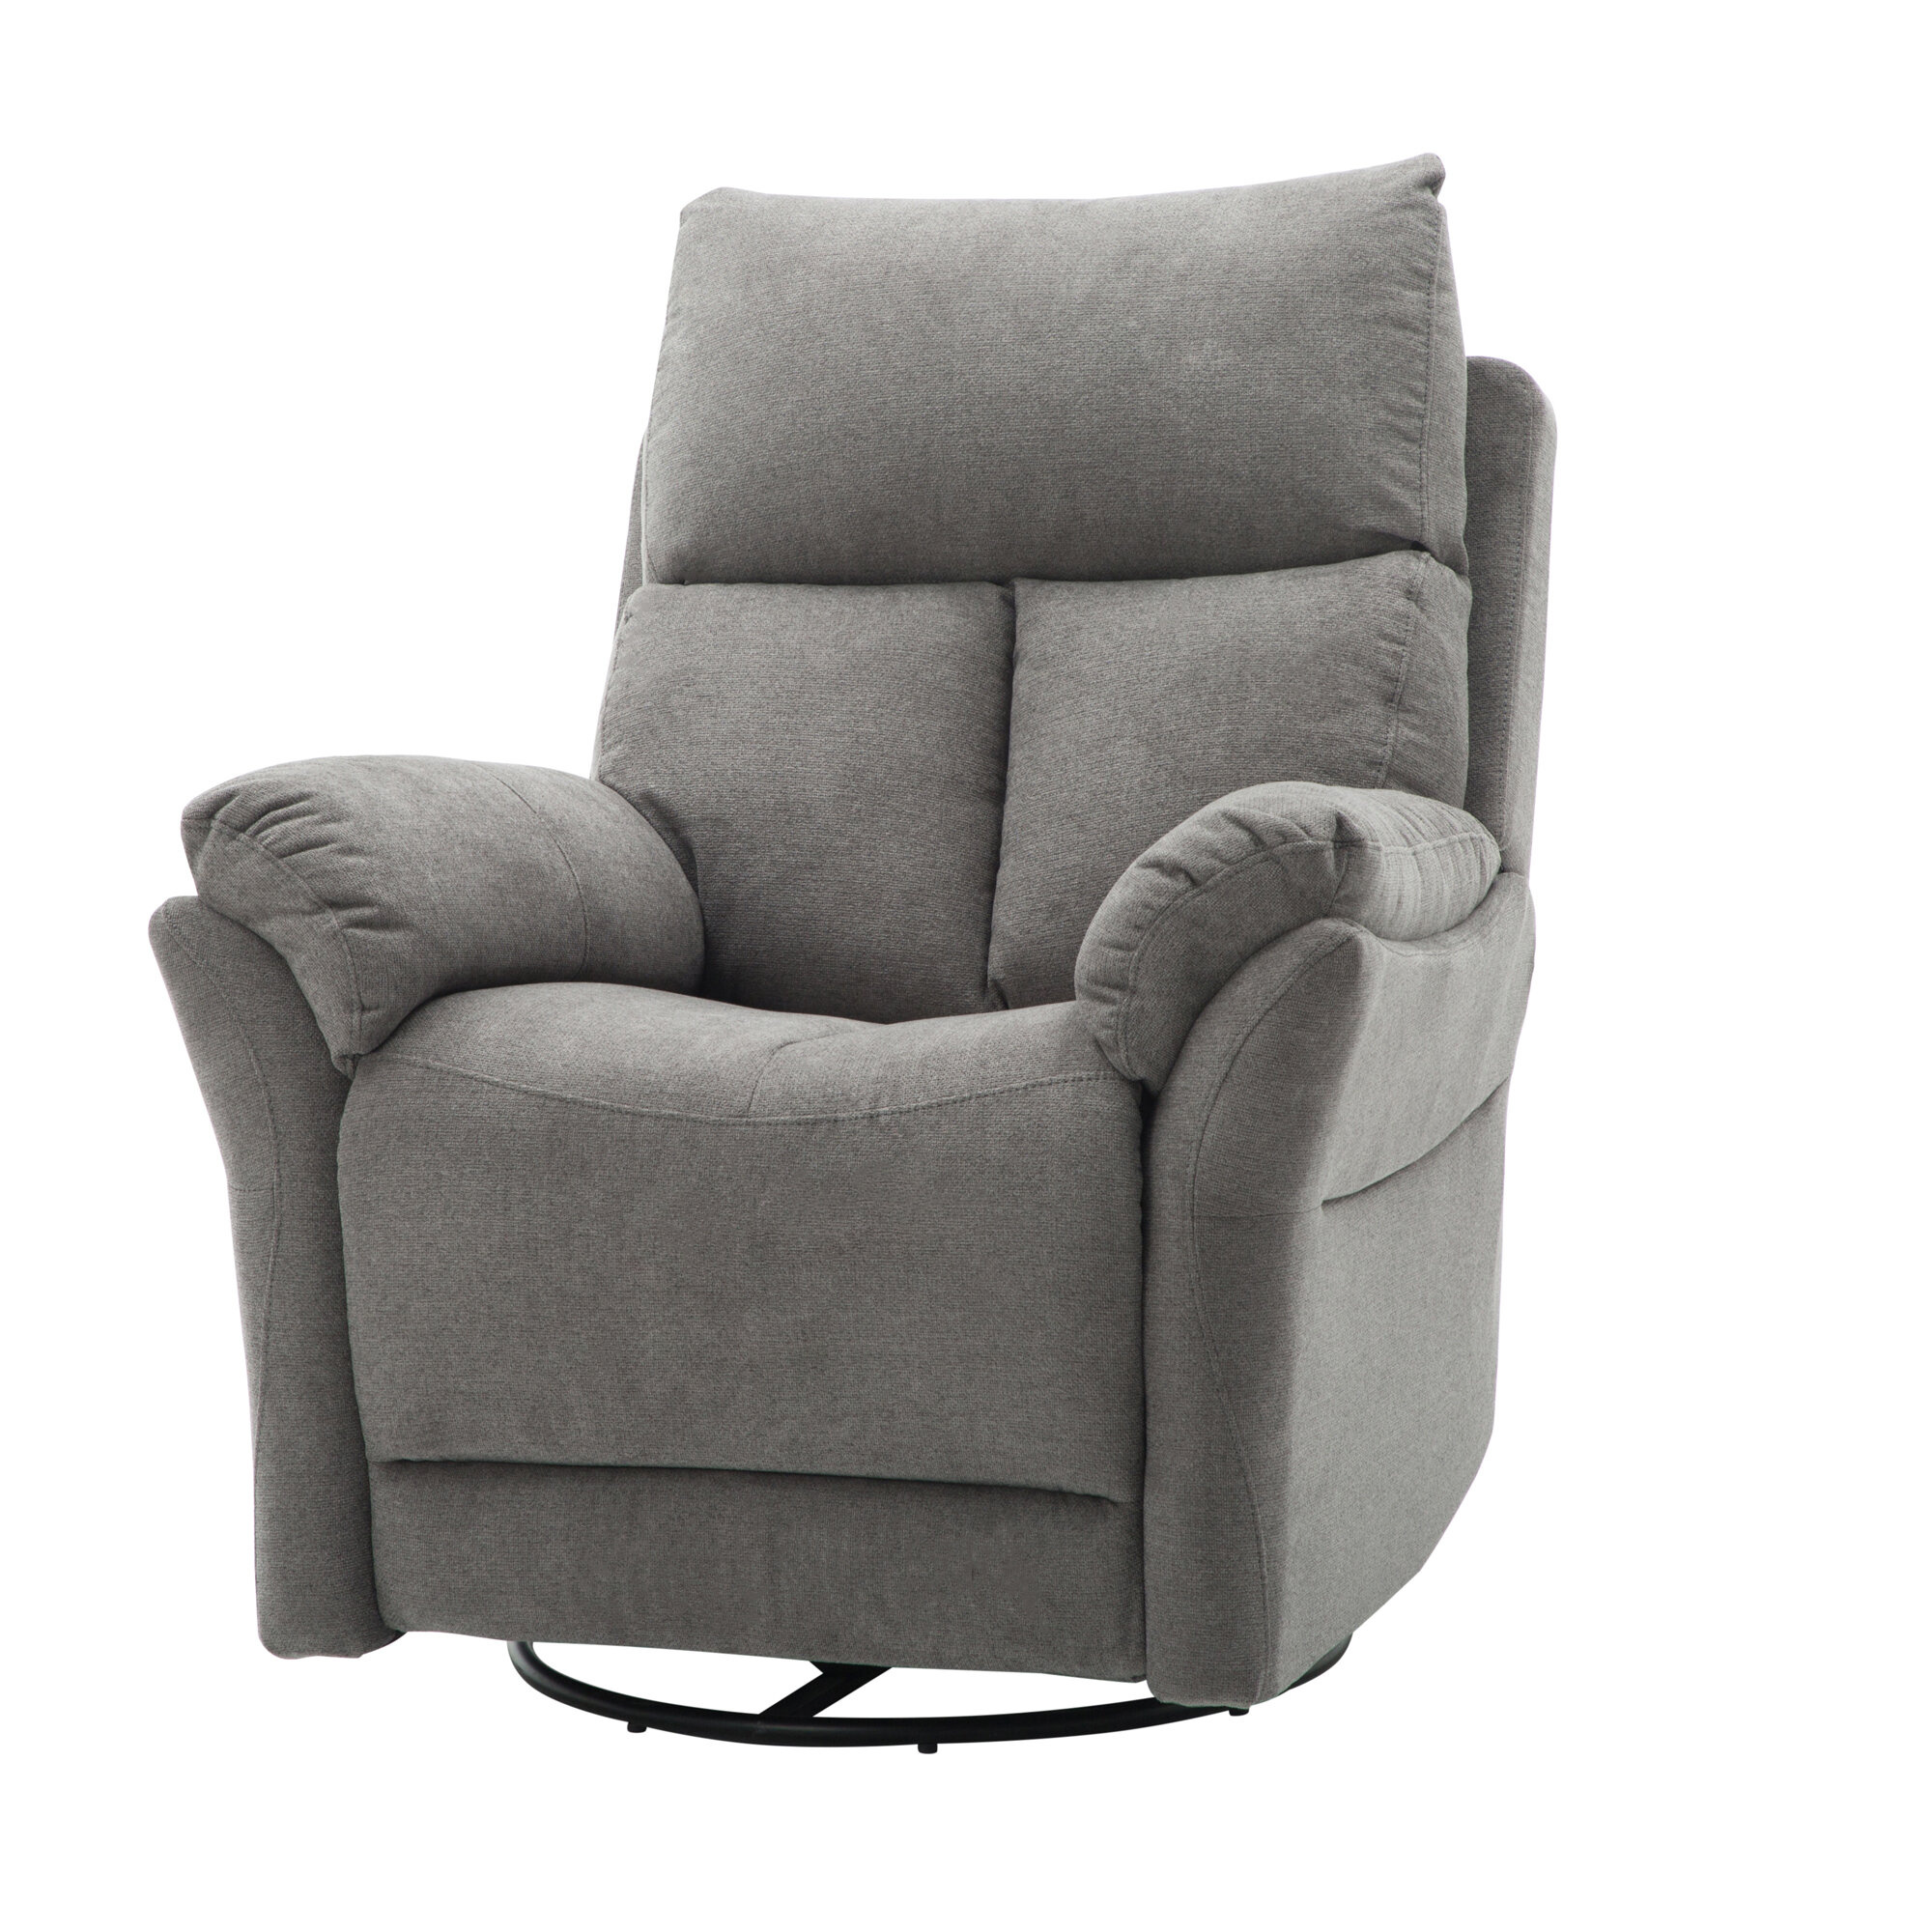 Chair That Rocks Swivels And Reclines | Recliner Chair